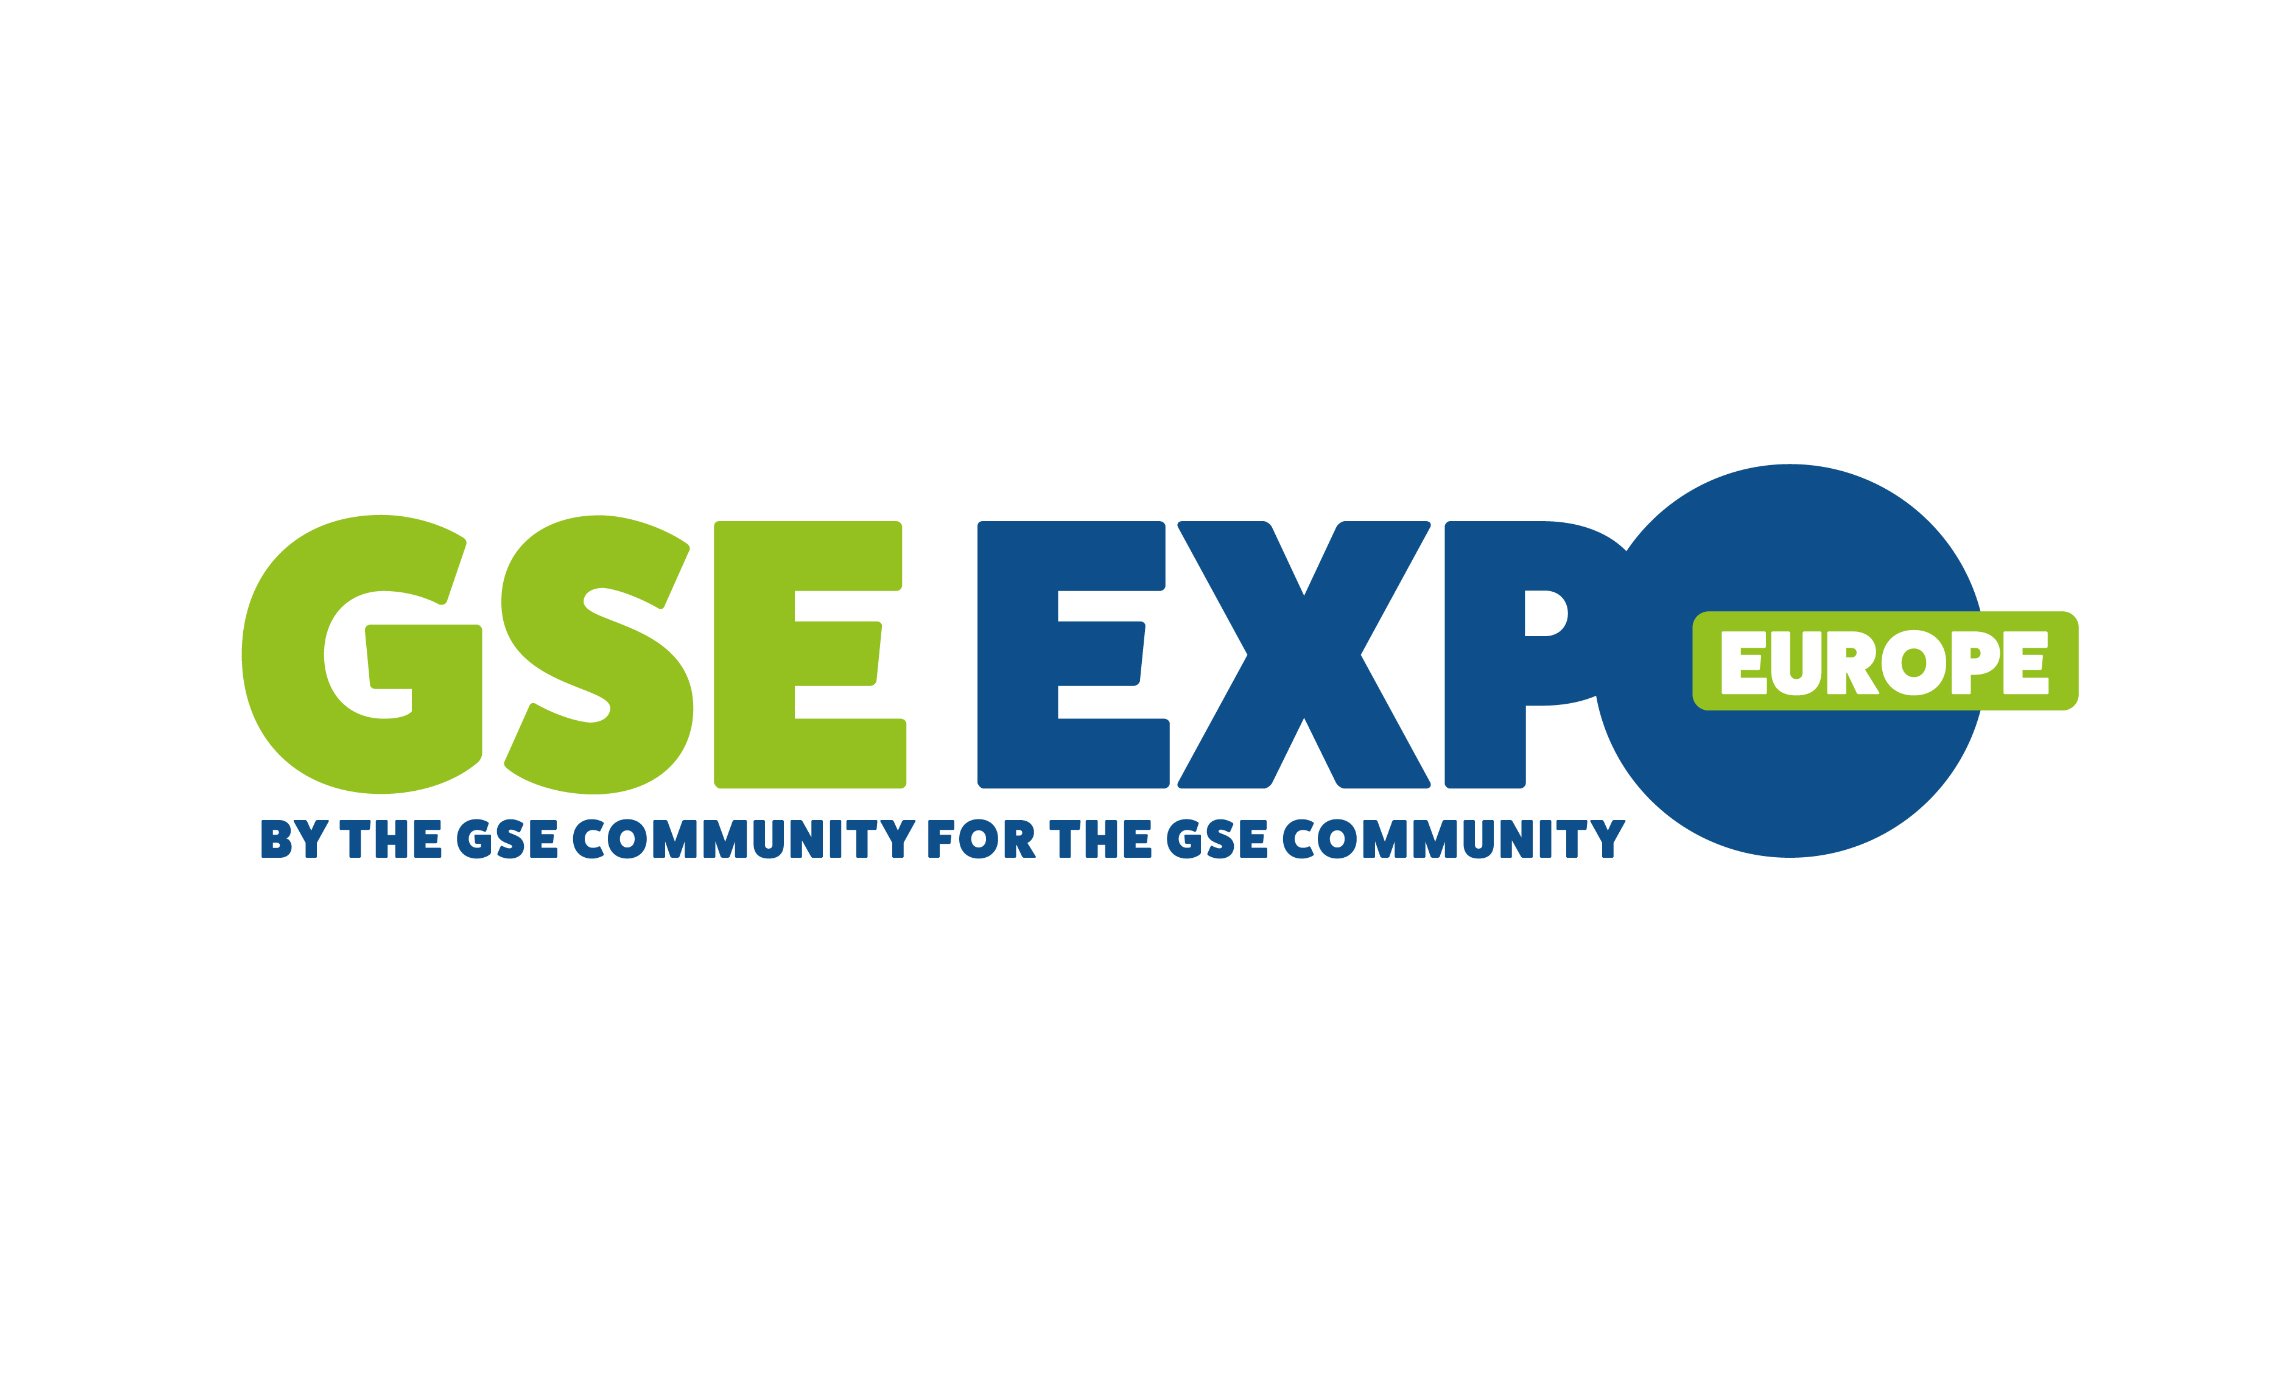 GSE Expo Europe